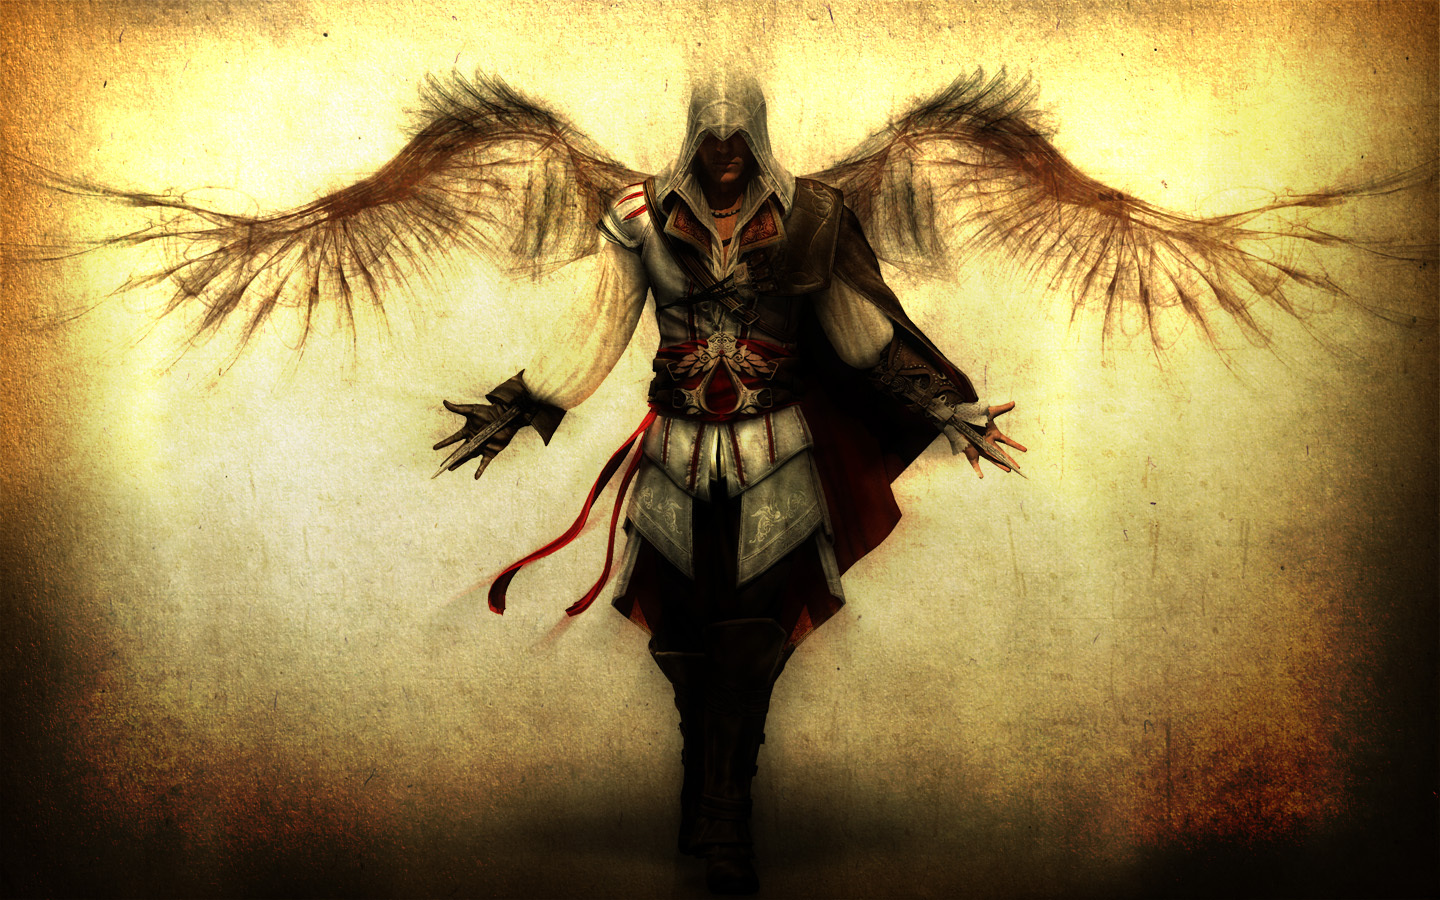 assassin's creed, video game, ezio (assassin's creed), assassin's creed ii